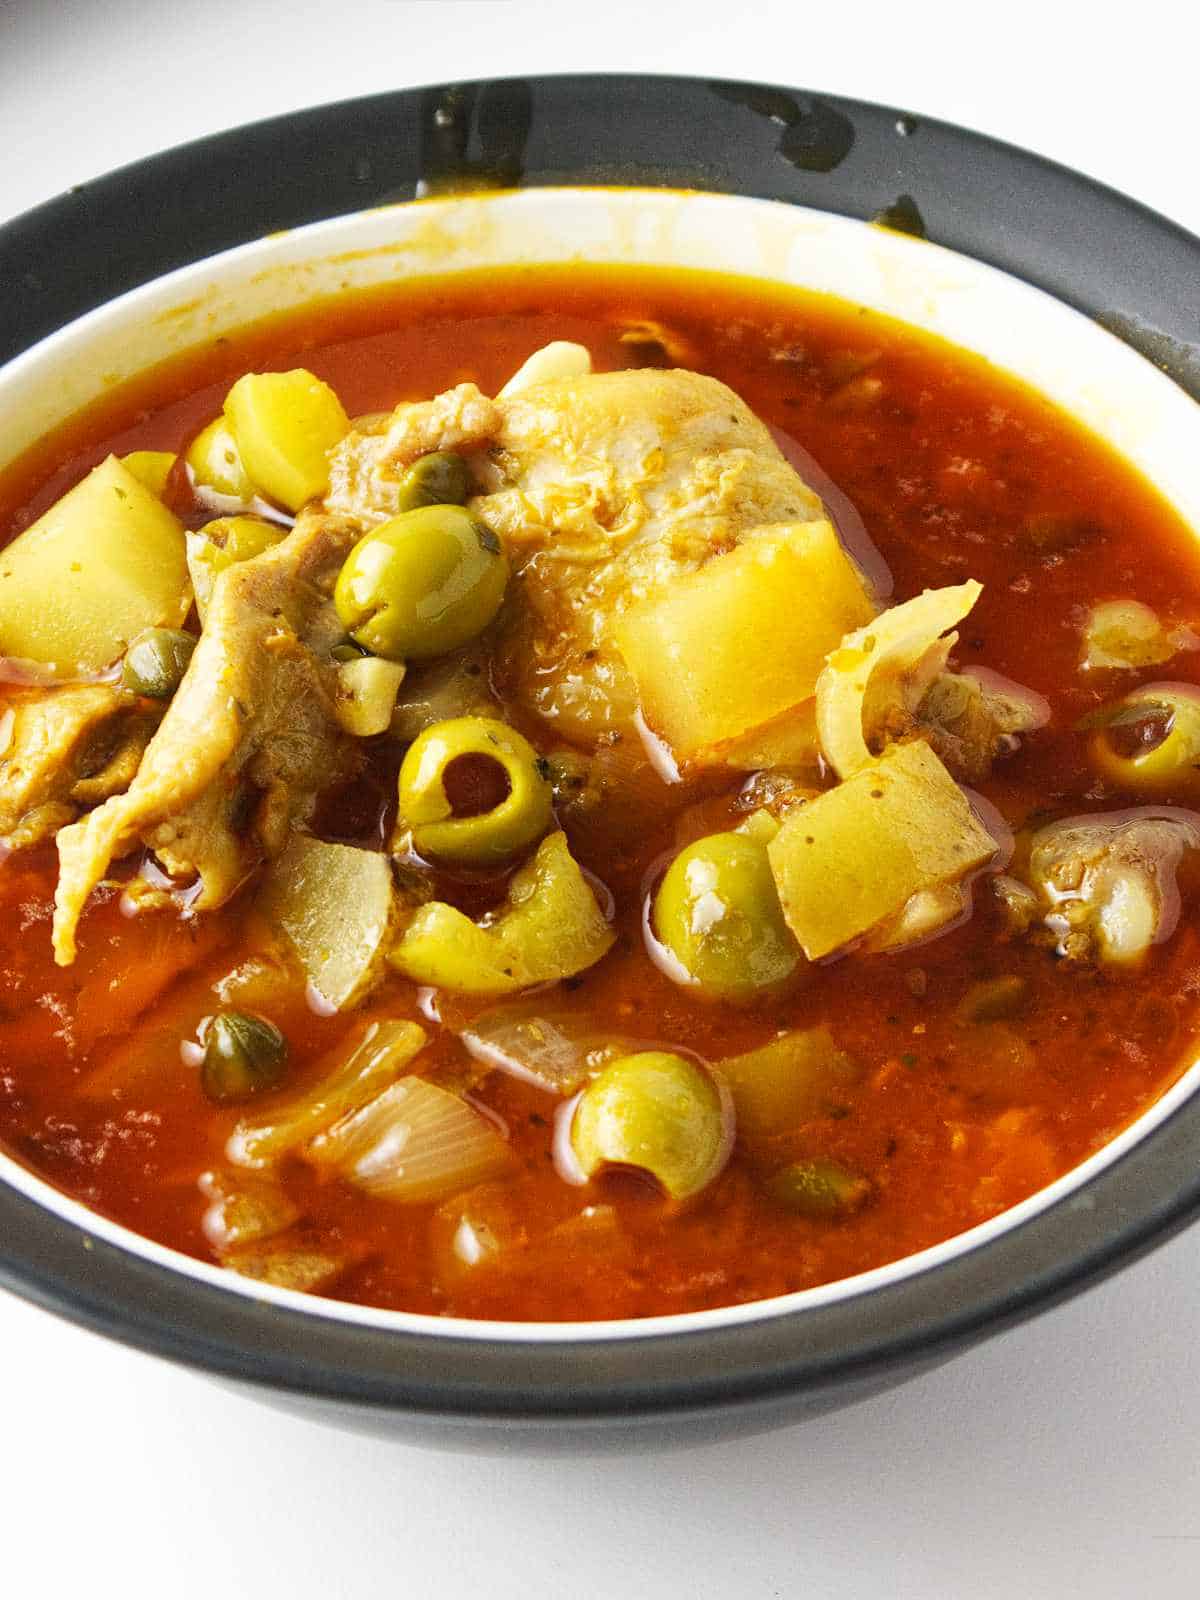 bowl of Cuban Chicken Fricassee (fricase de pollo).